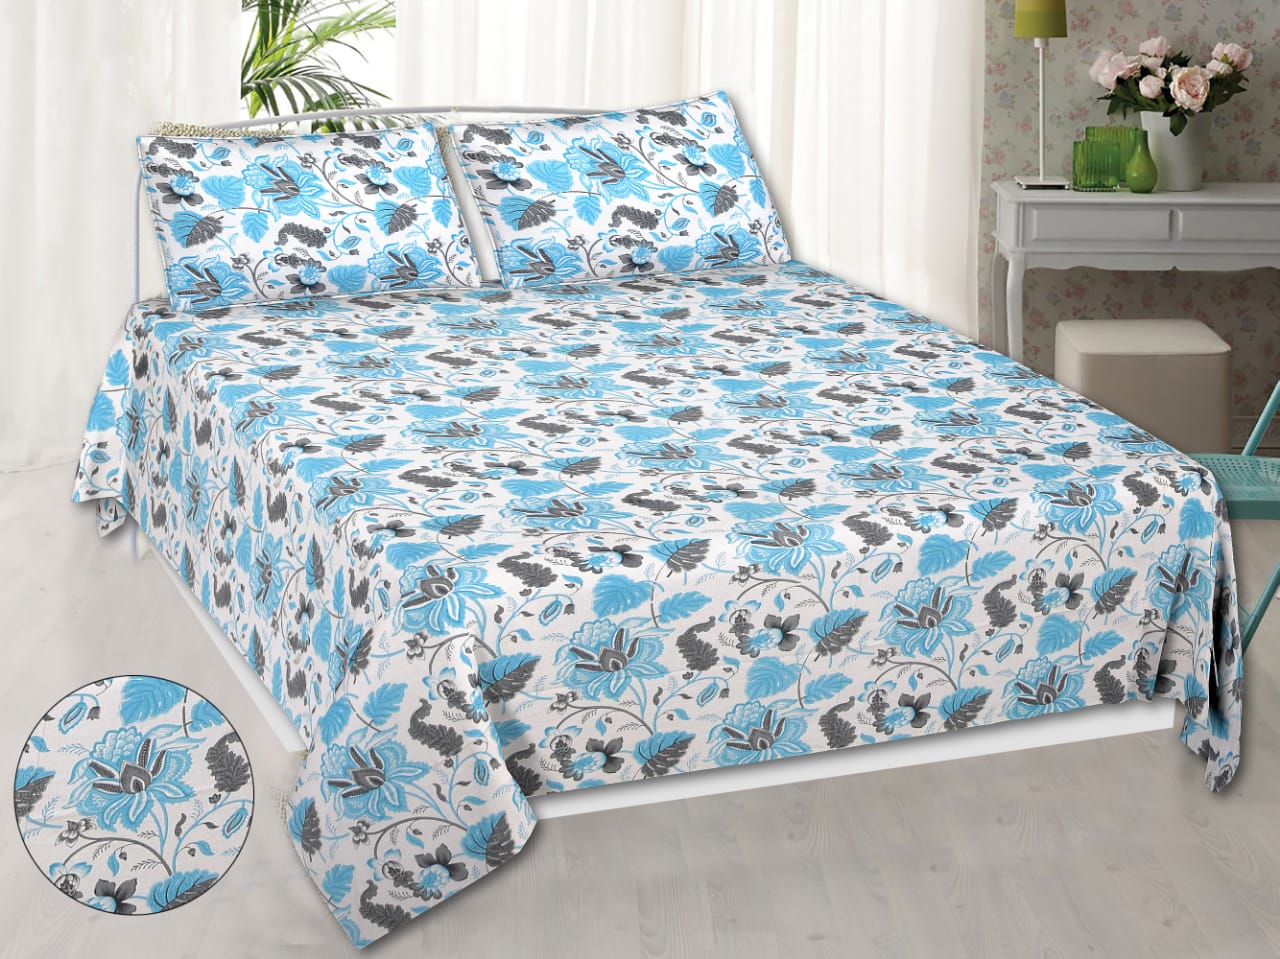 Wanderlust Premium | Full Size 90 x 108 in | 100% Pure Cotton | Double Bedsheet with 2 Pillow Covers (ANKI01)